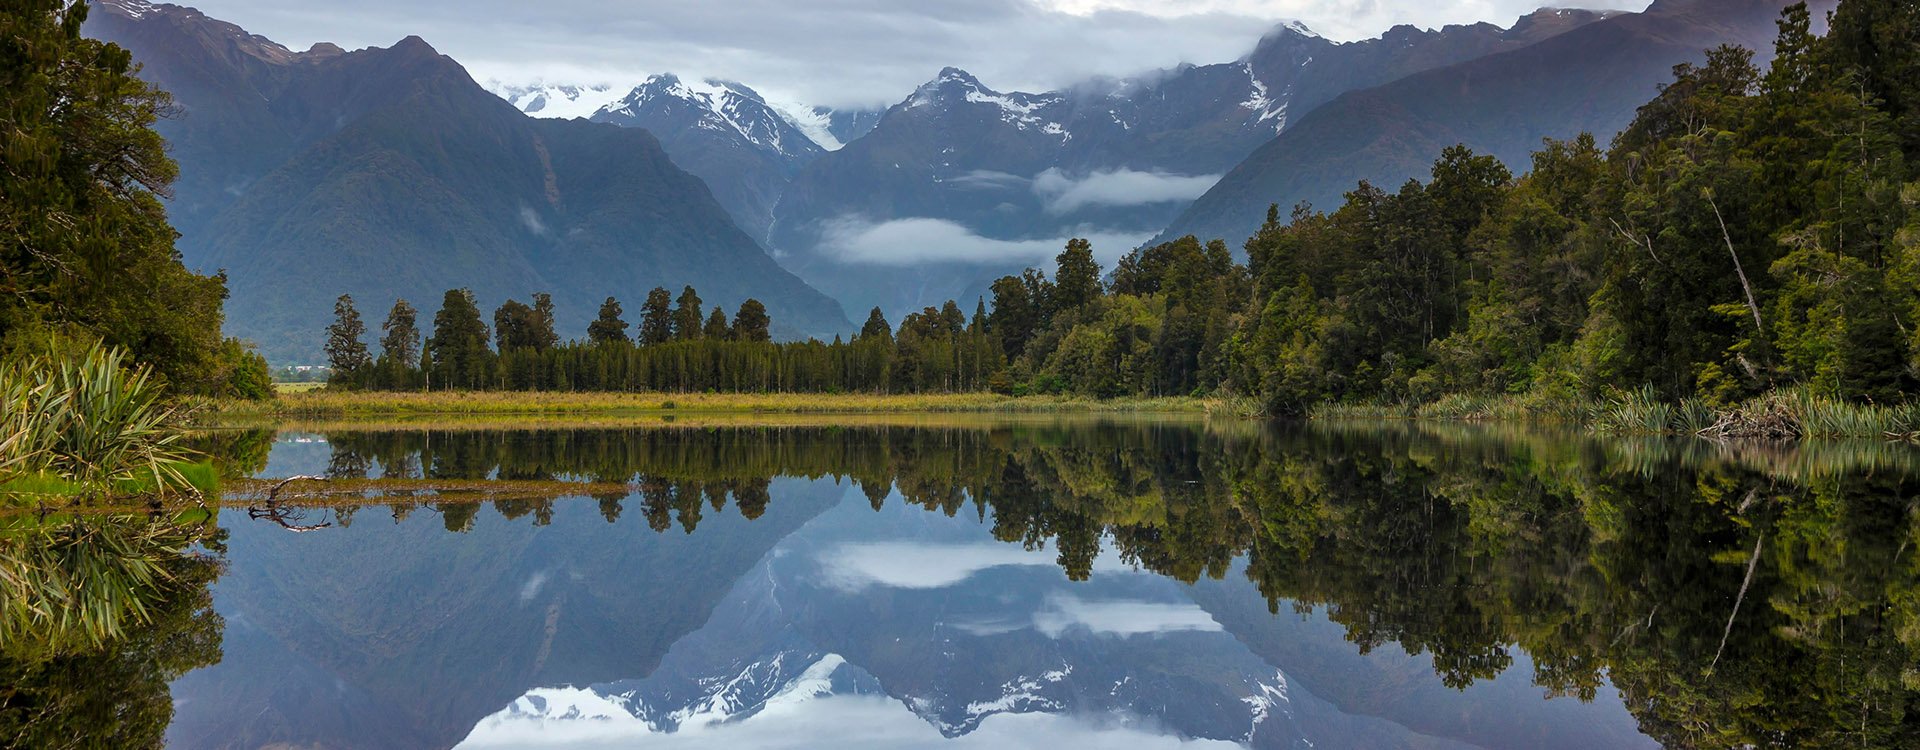 Mt Tasman and Mt Cook, reflection in Lake Matheson, Westland National Park, New Zealand